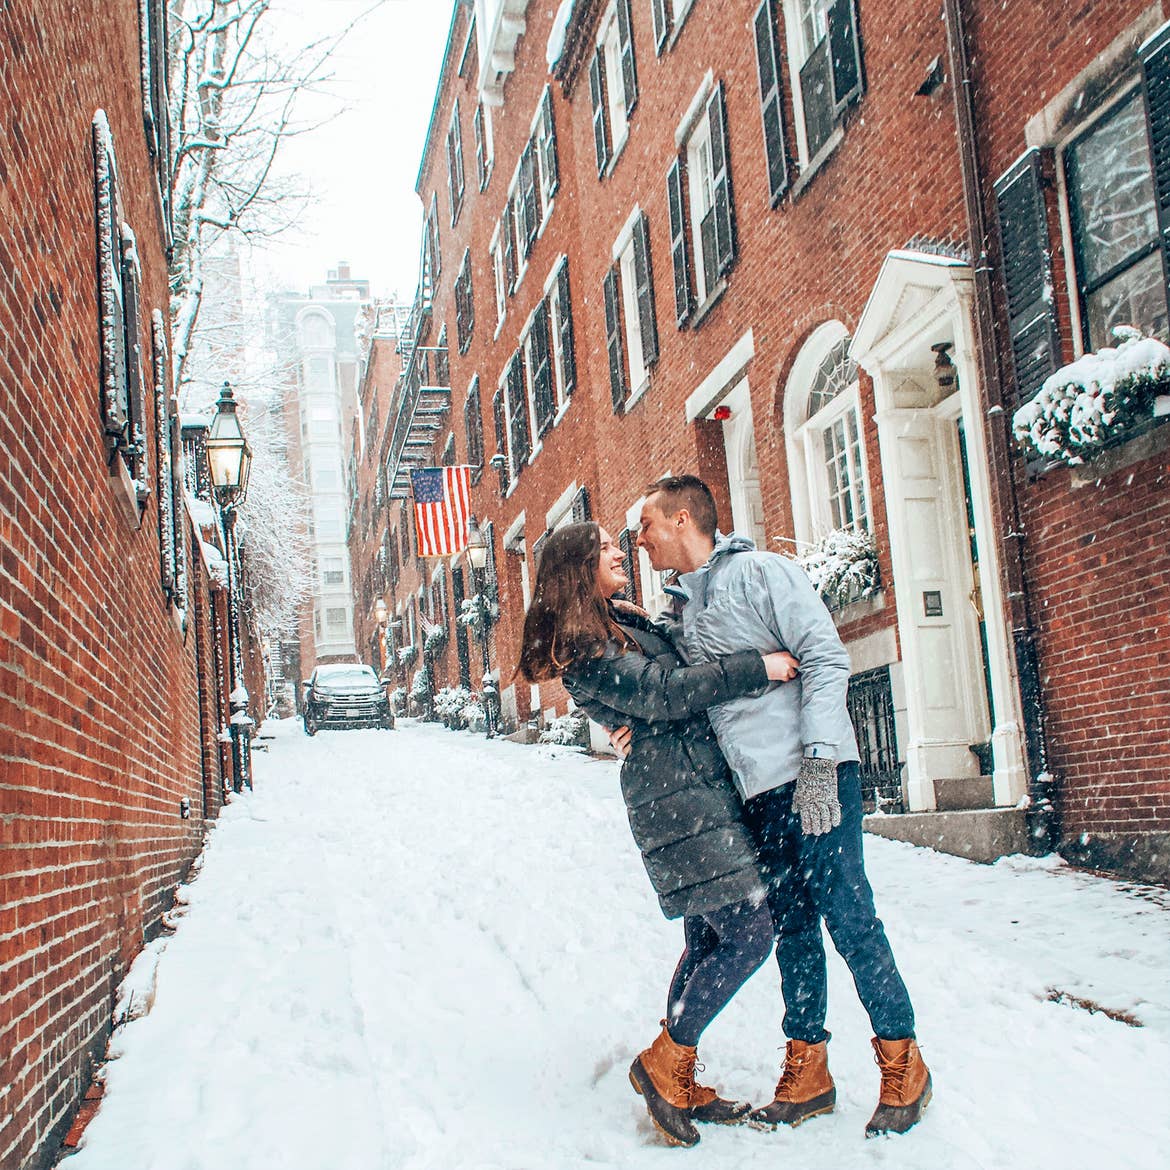 A woman in a green puffer jacket and a man in a white-grey jacket embrace on a snow-covered street near historical brick buildings.